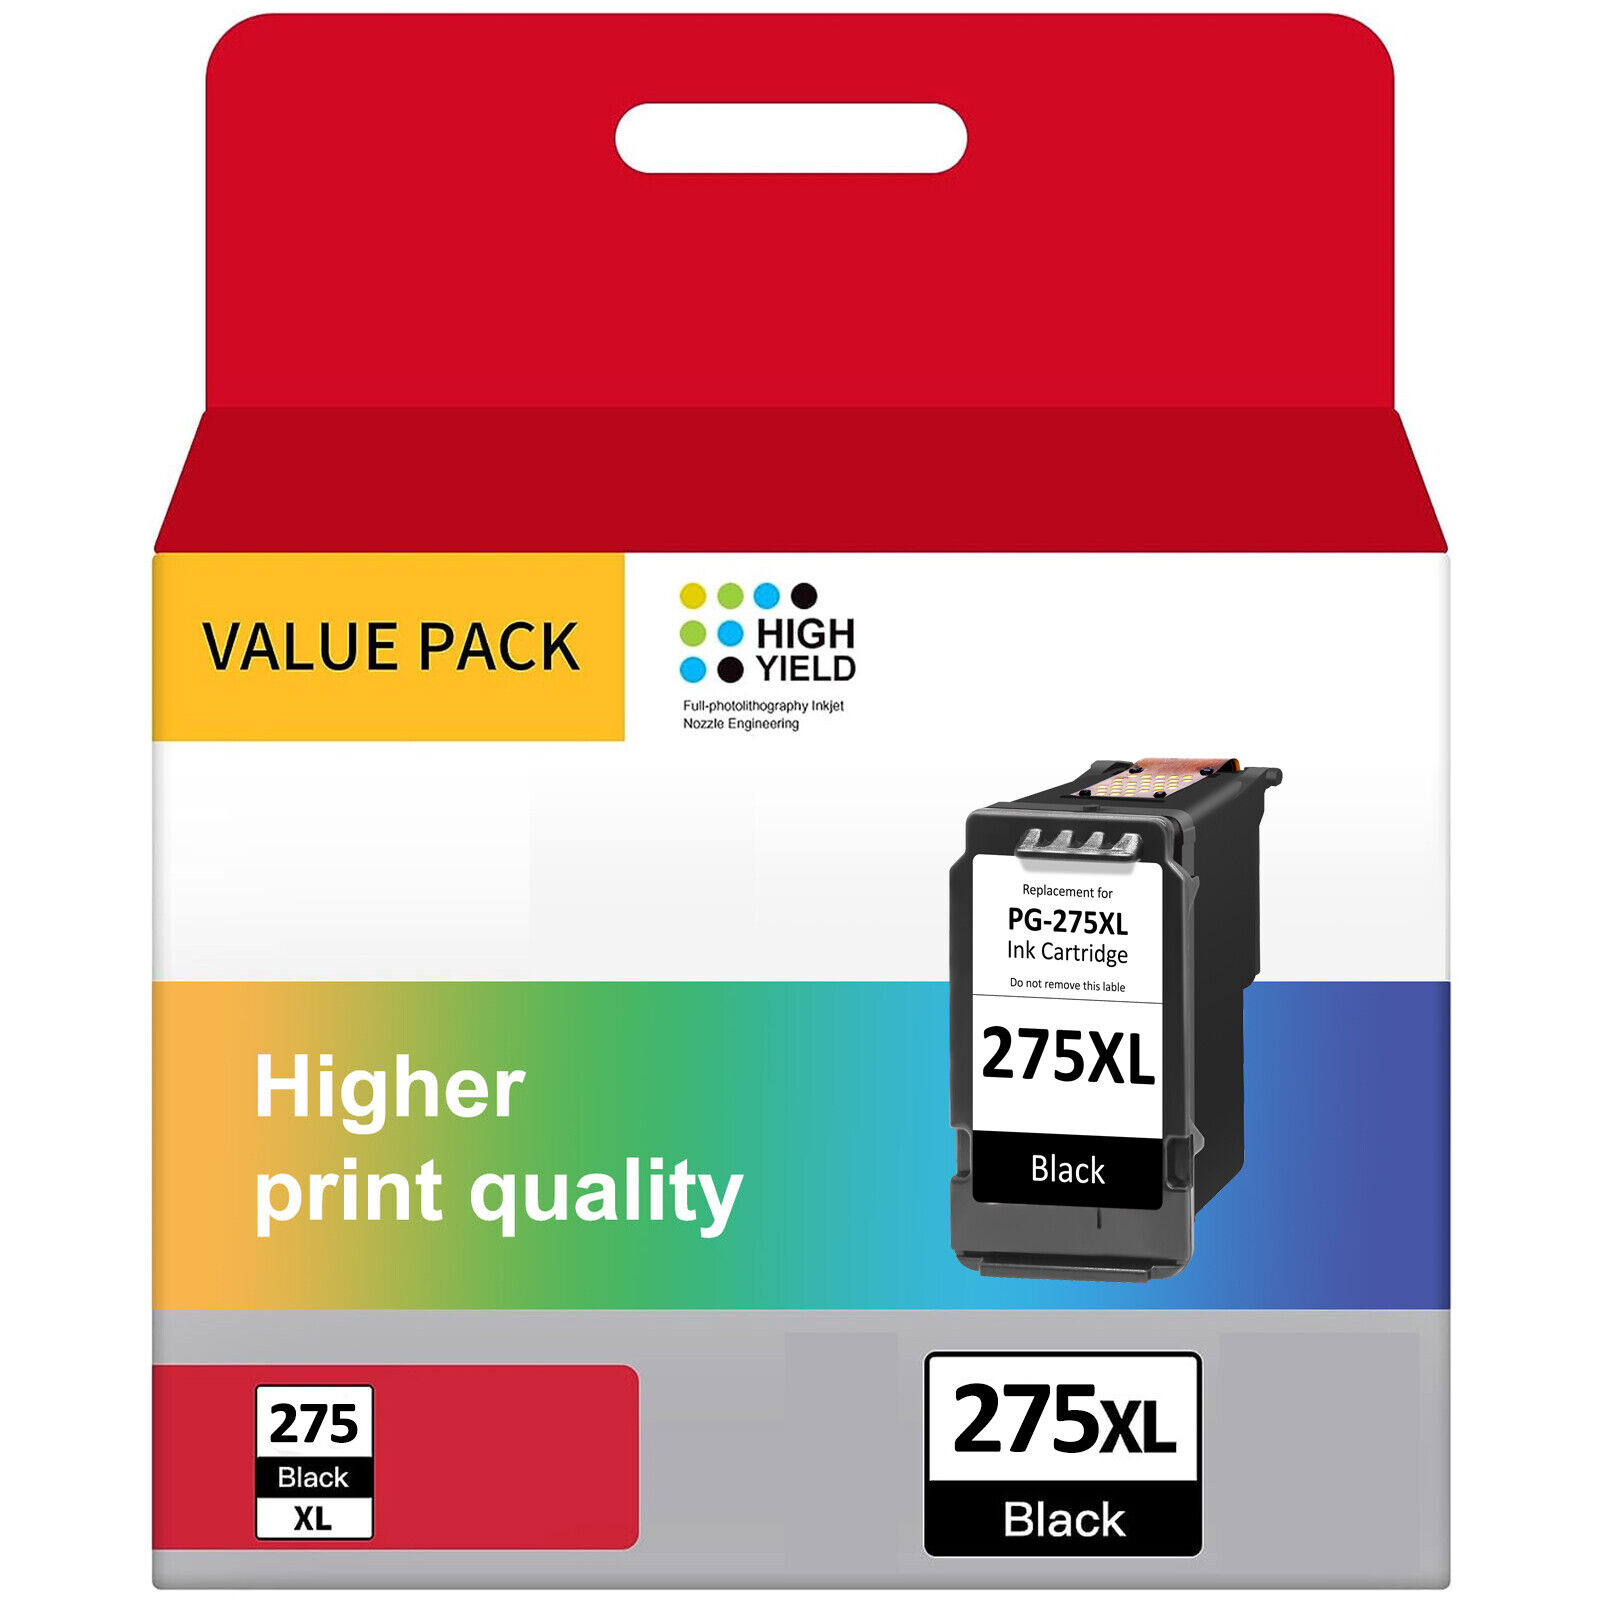 PG-275XL Ink Cartridge Replacement for Canon CL-276XL PIXMA TR4720 TS3520 TS3500